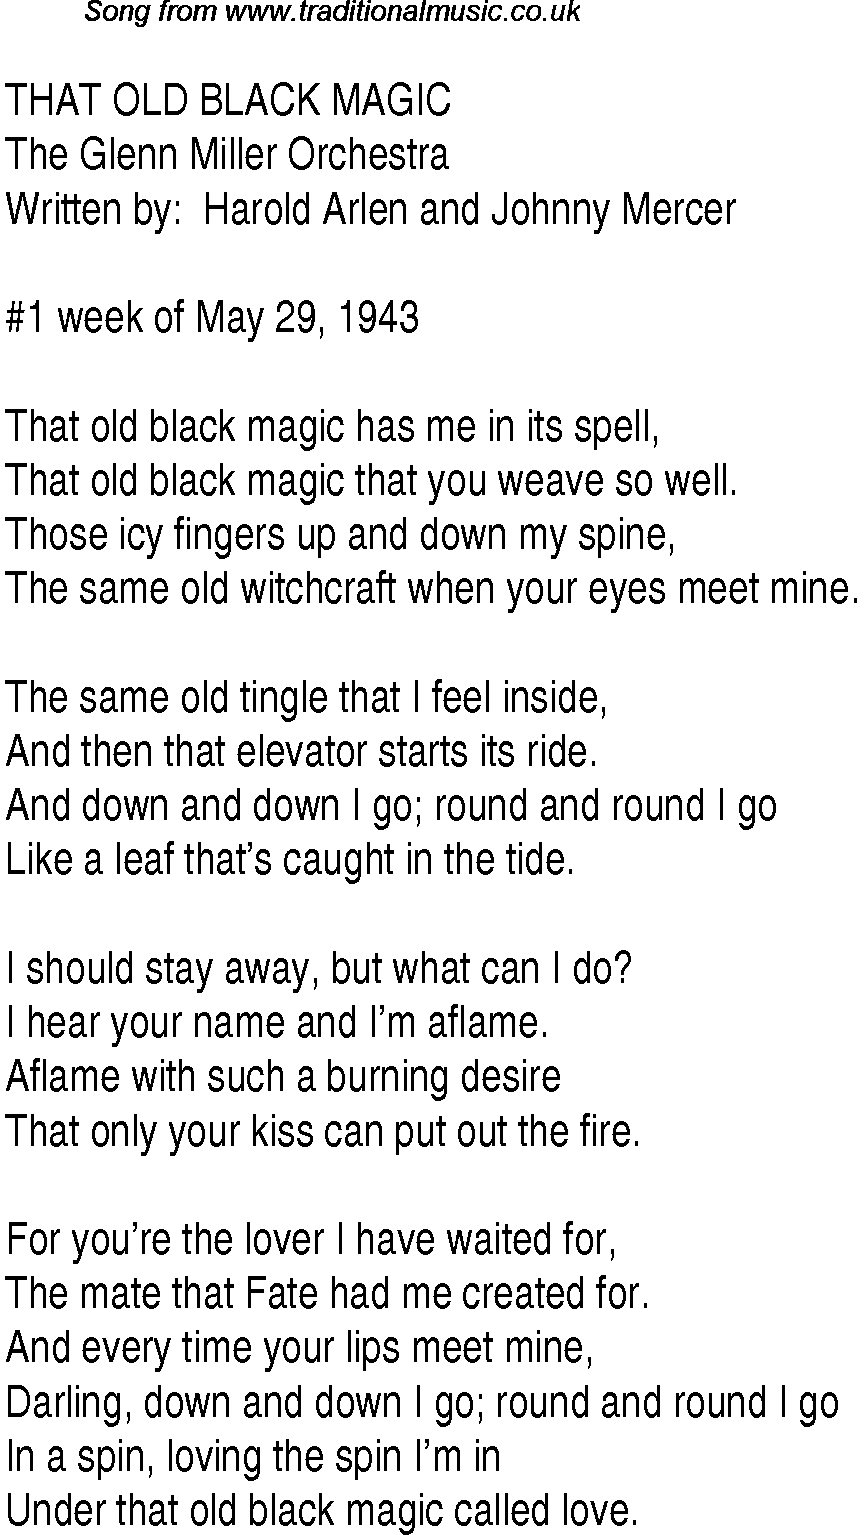 Music charts top songs 1943 - lyrics for That Old Black Magicgm